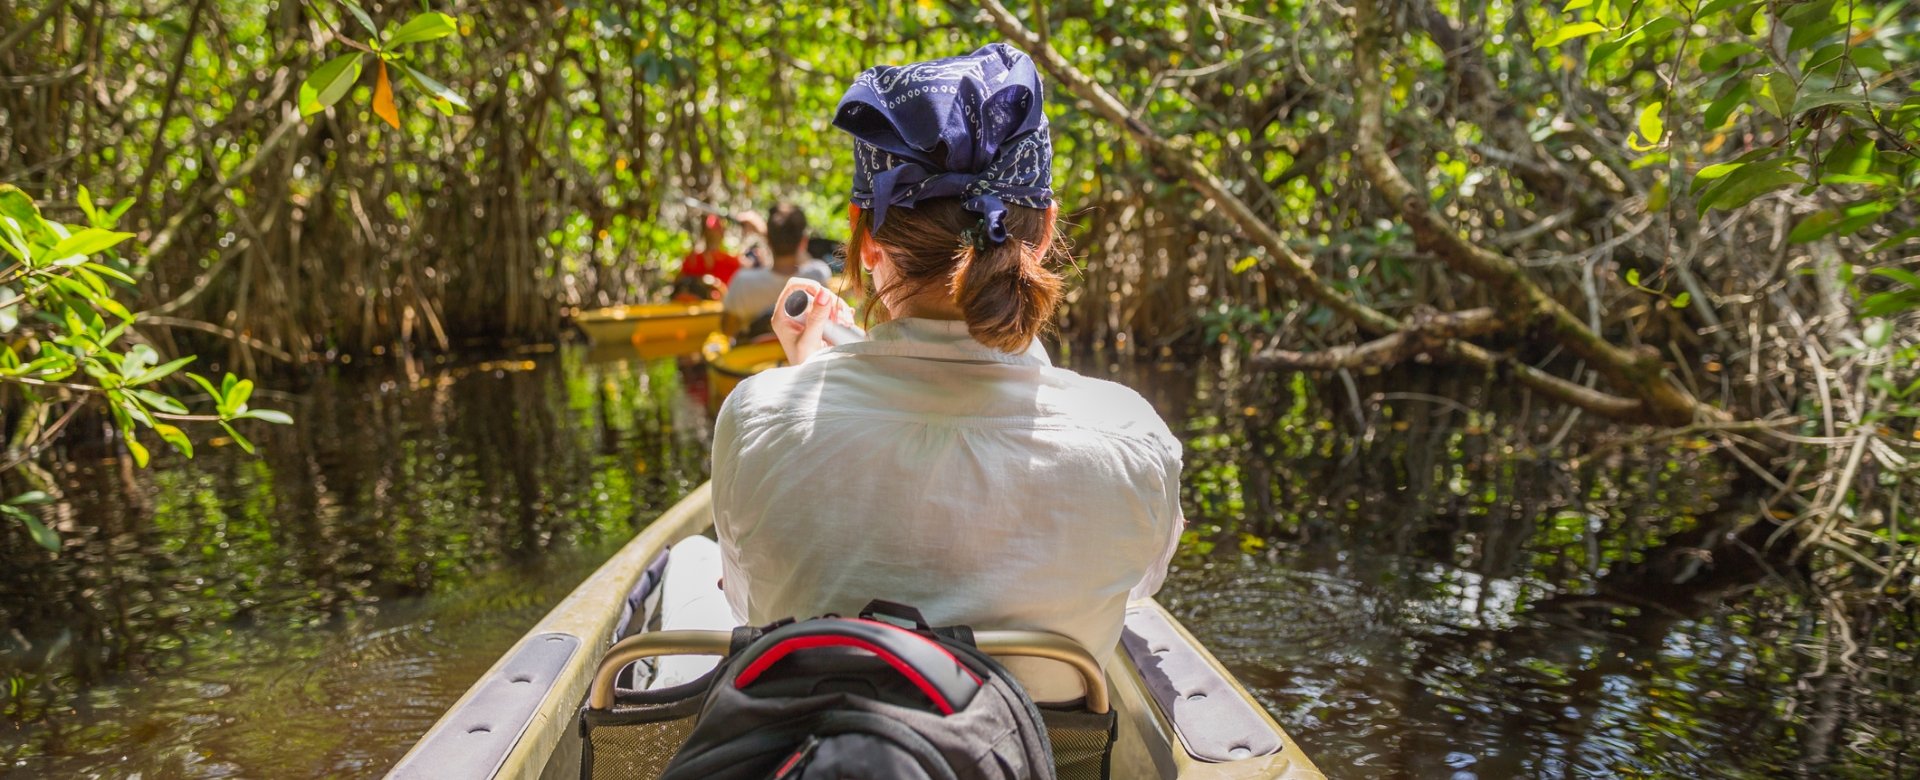 What Cook Gear Should I Pack for the Everglades?